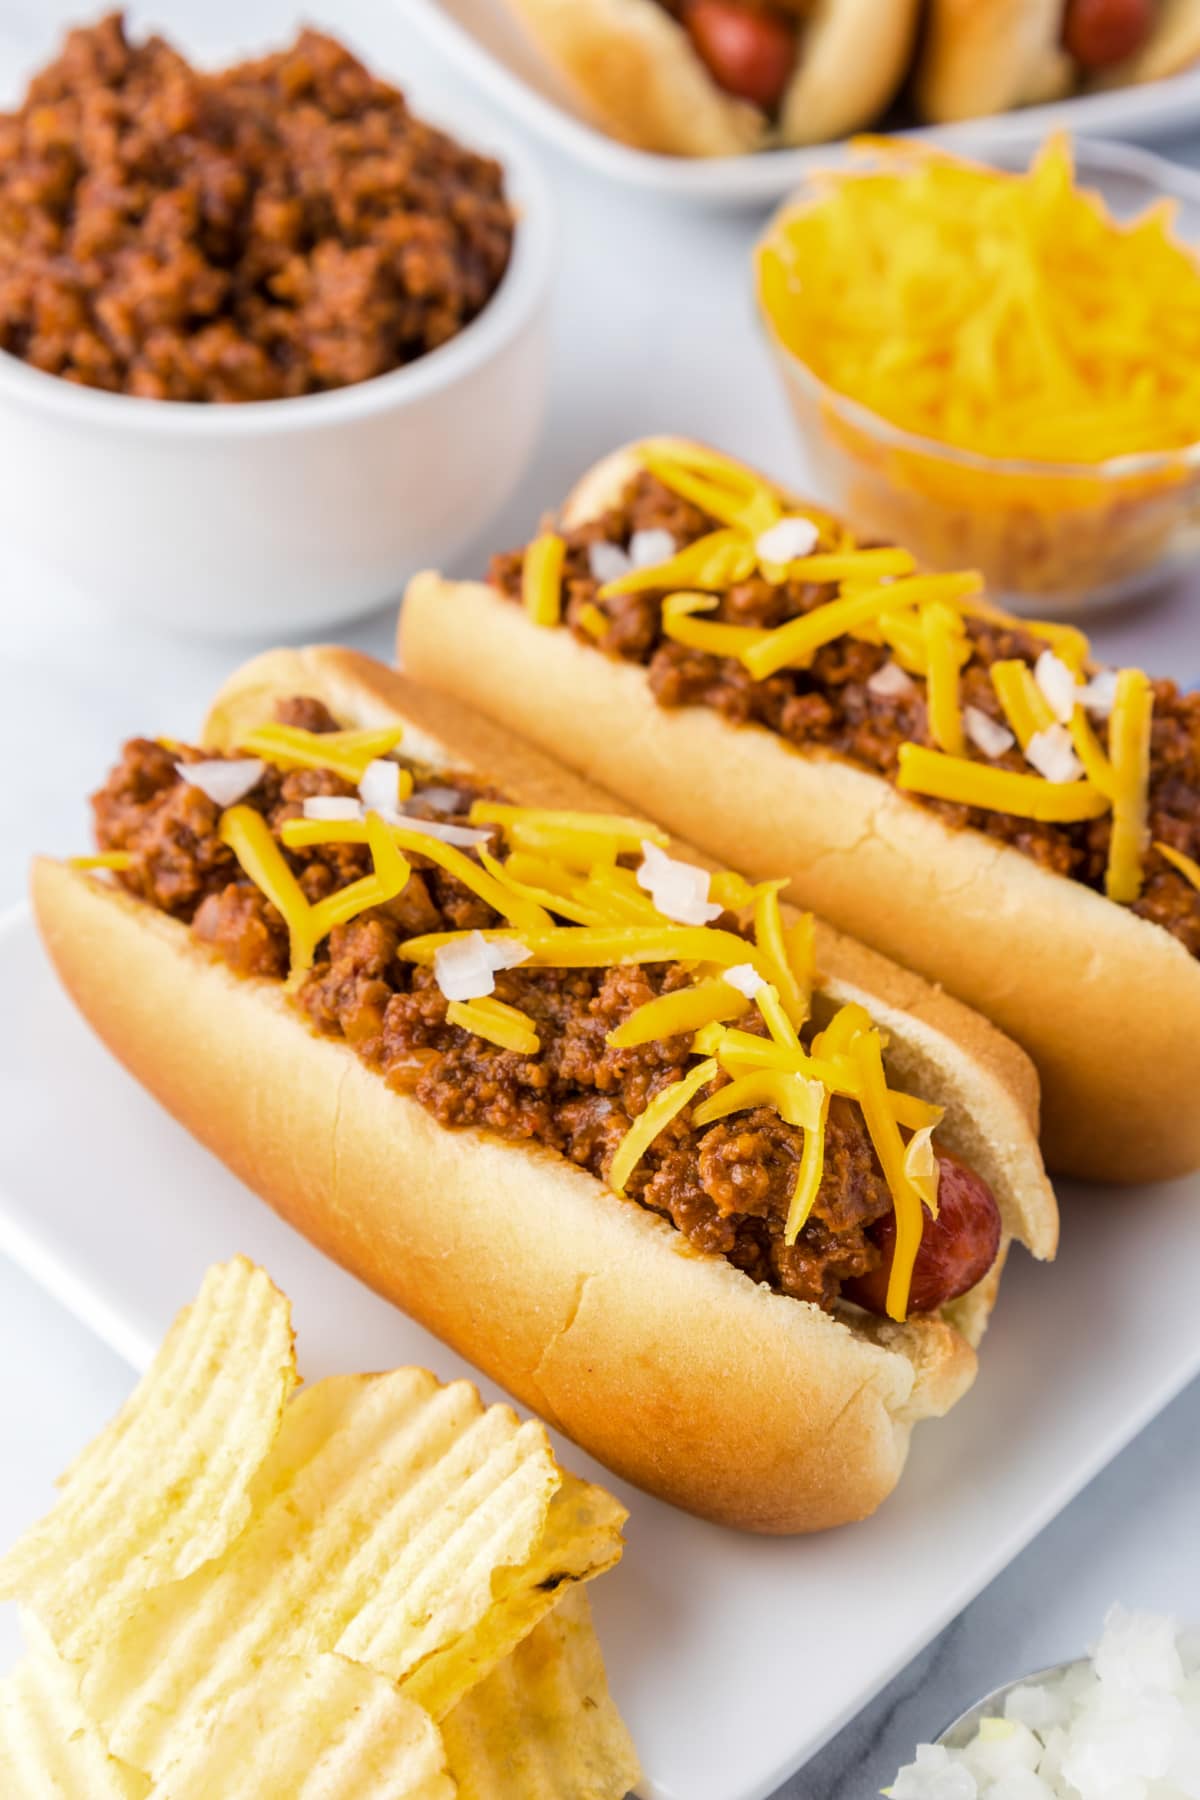 hot dogs in buns with chili, cheese and onions